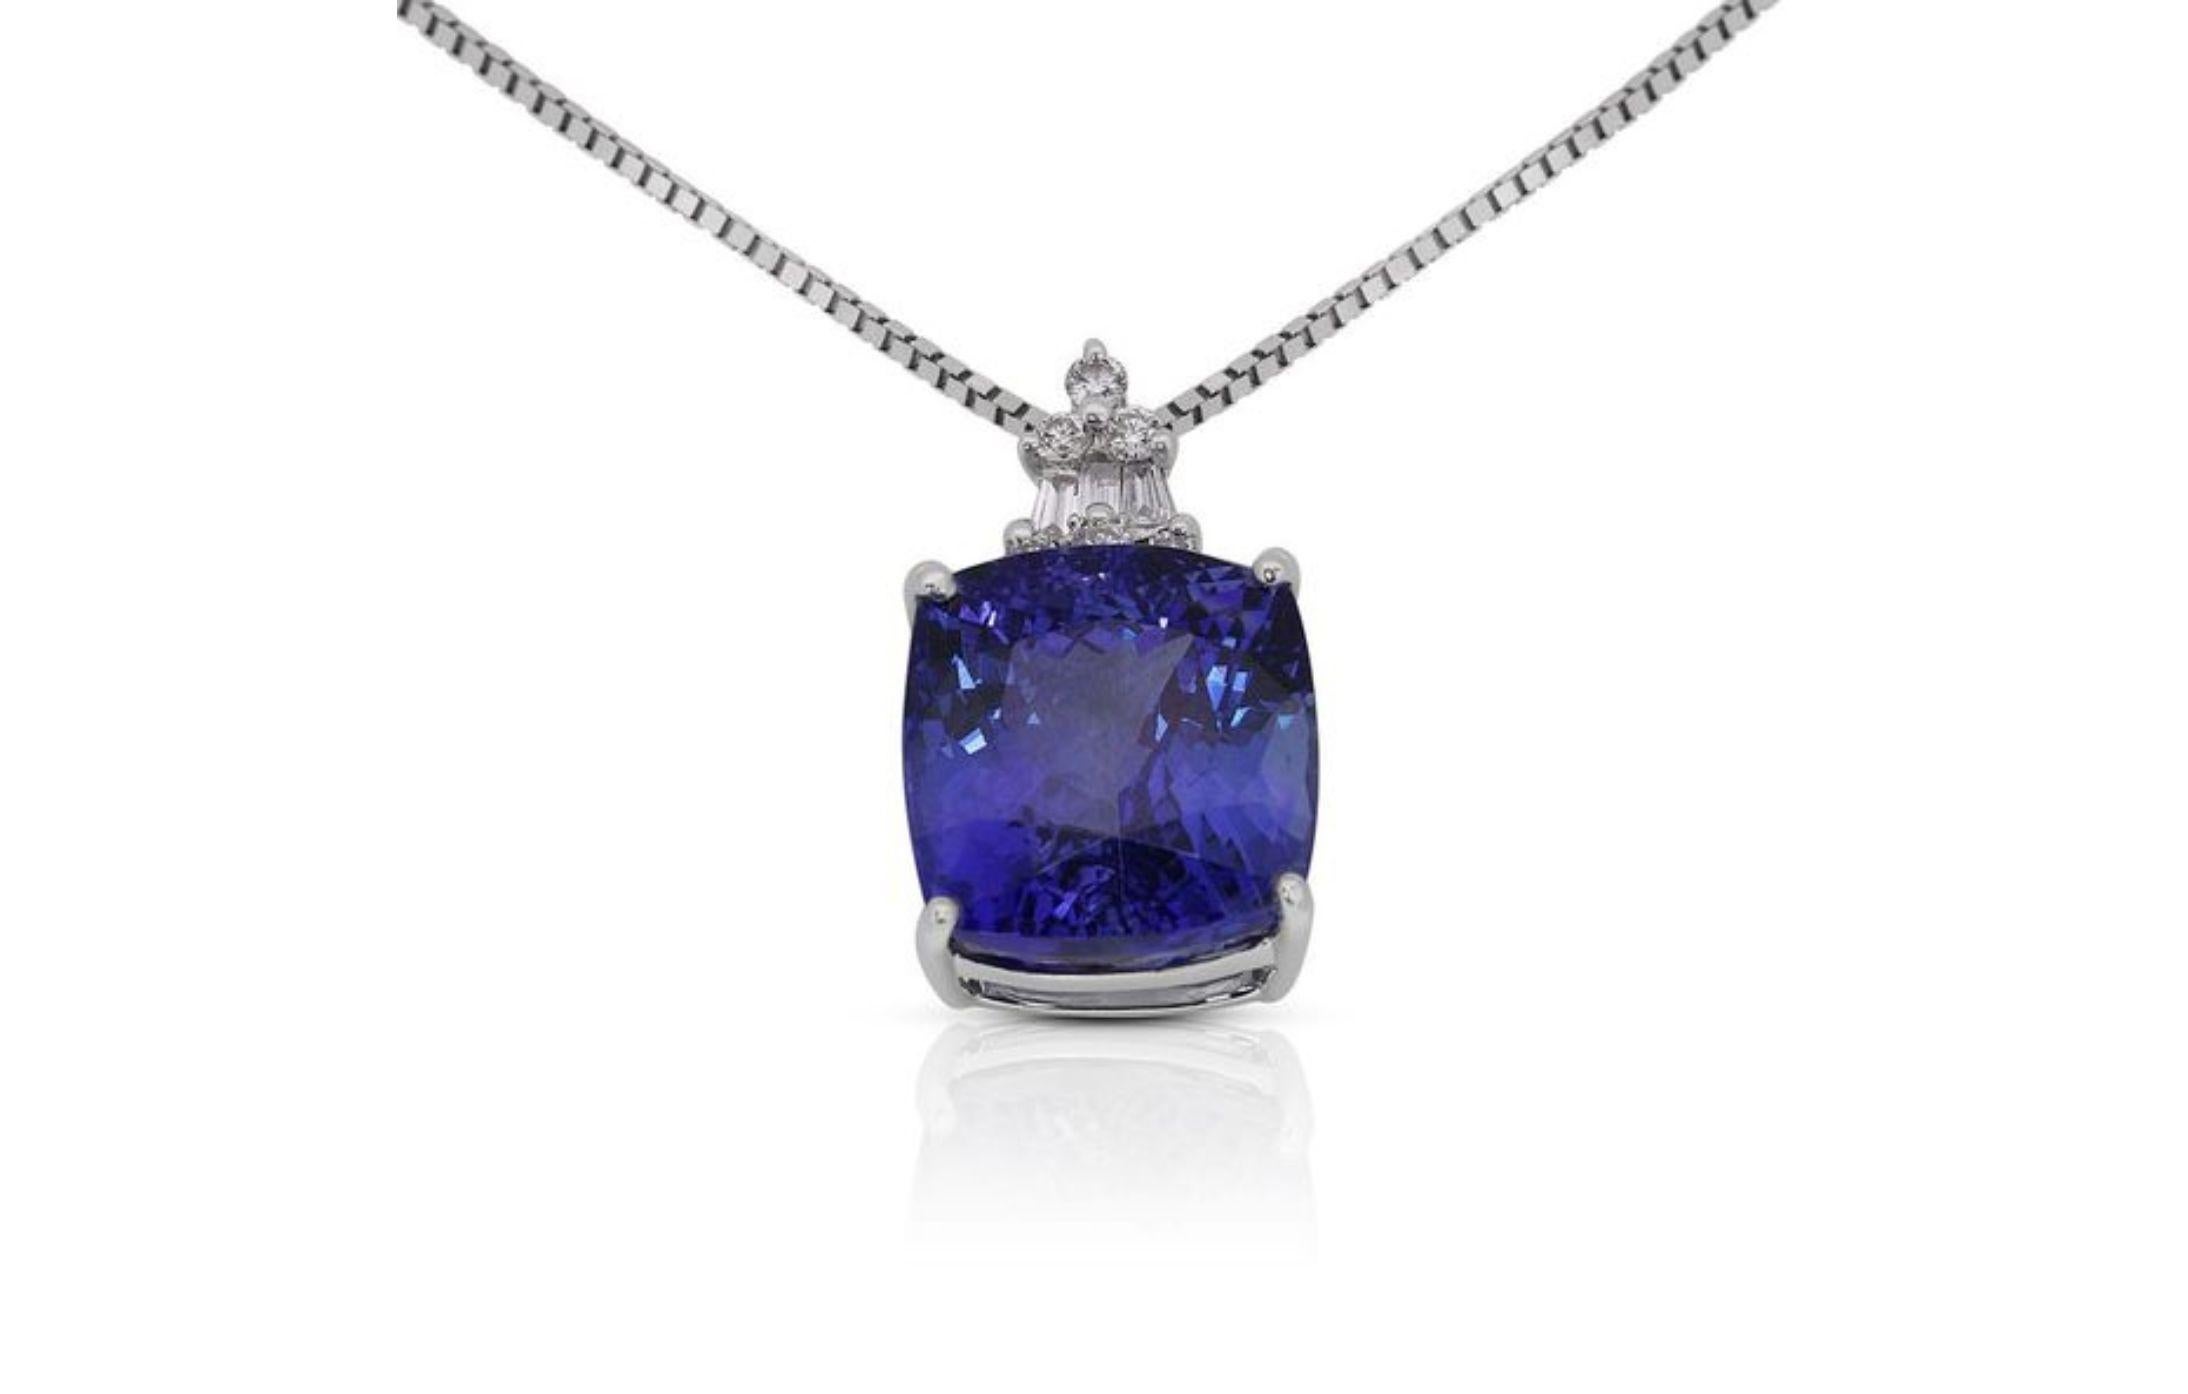 At the heart of the necklace is a stunning 6.42-carat tanzanite, known for its captivating violet-blue hues. The size of the gemstone ensures a striking presence, making it a true centerpiece that evokes both elegance and sophistication. The